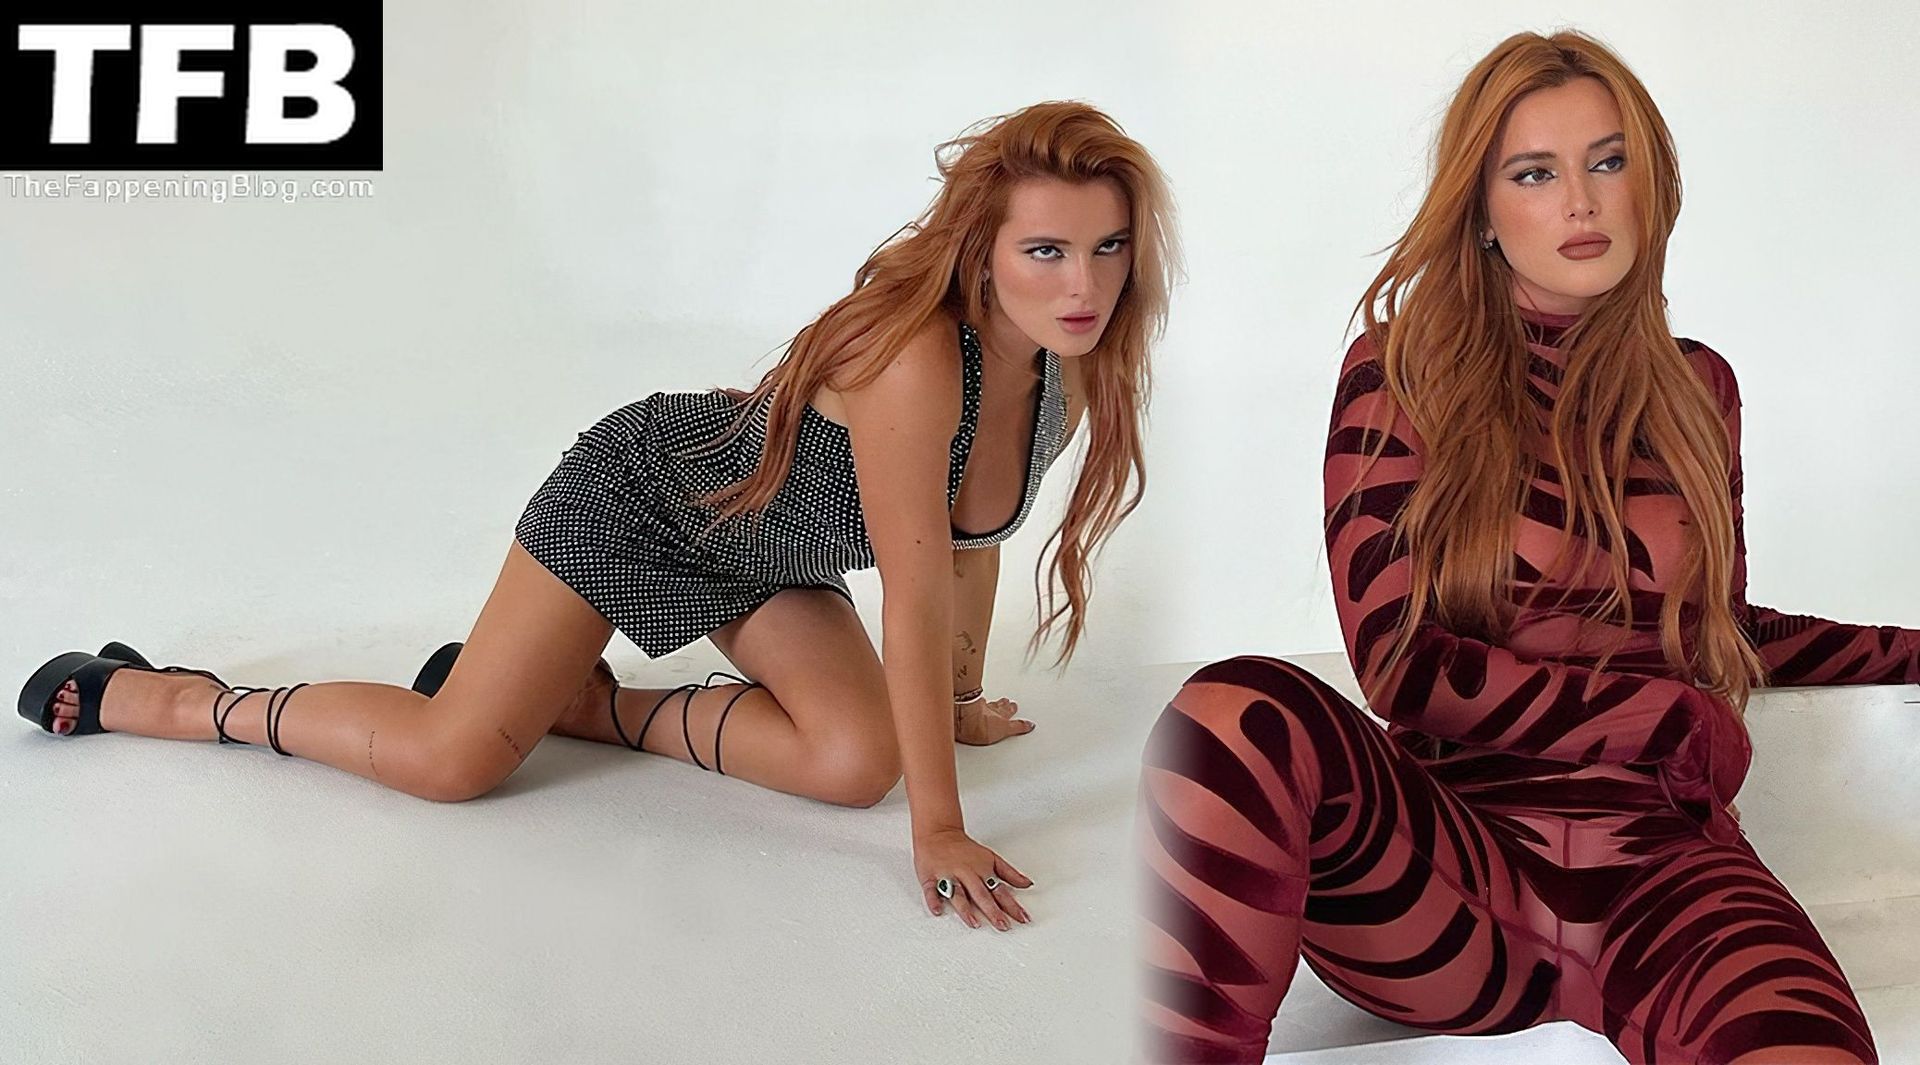 Bella-Thorne-Sexy-SHeer-Outfit-1-thefappeningblog.com_.jpg